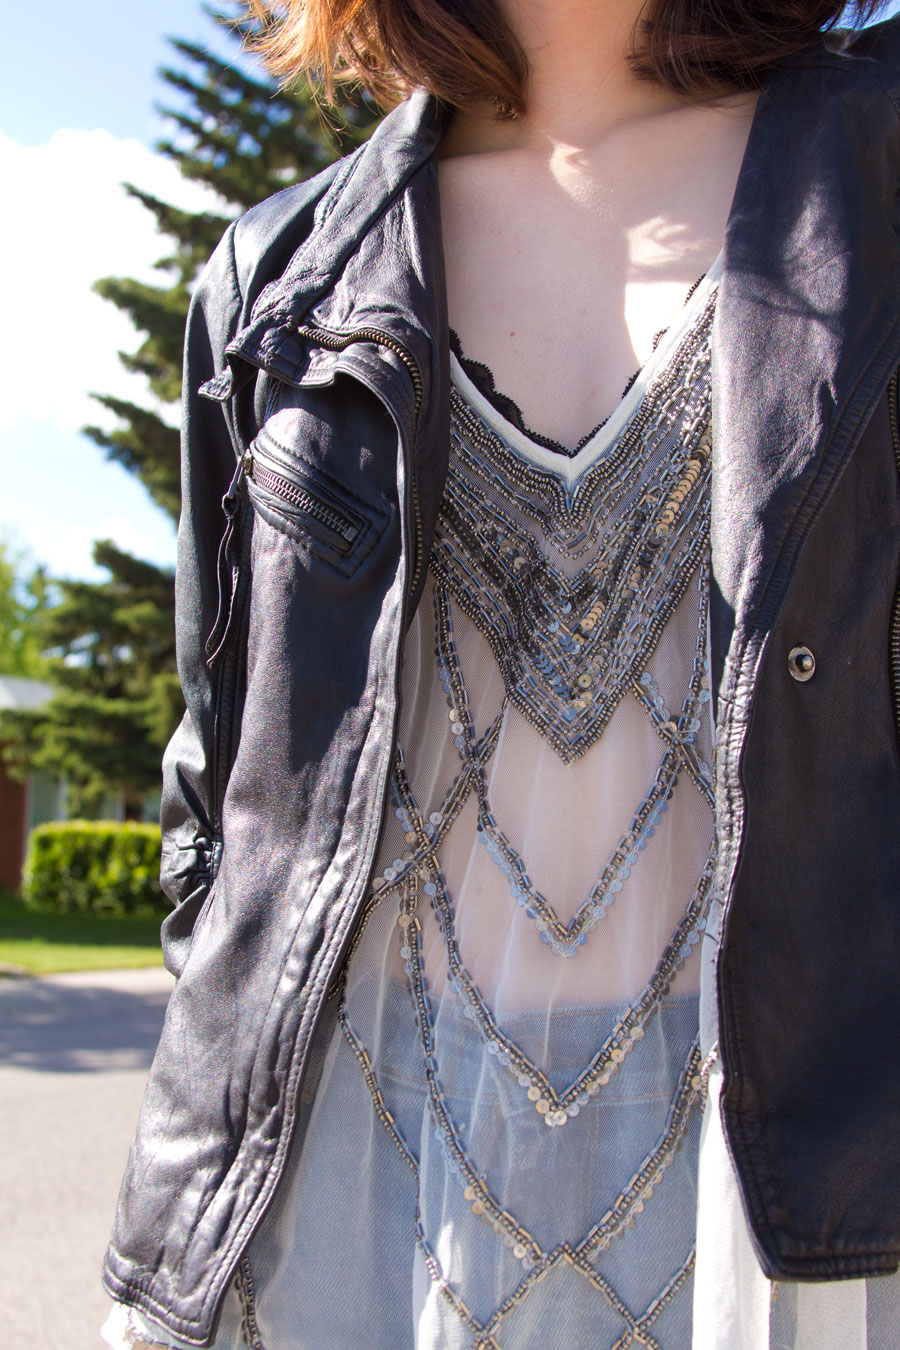 embellished top, sheer top, leather, botkier, danier, urban outfitters, kimchi blue, res denim, cat eye sunglasses